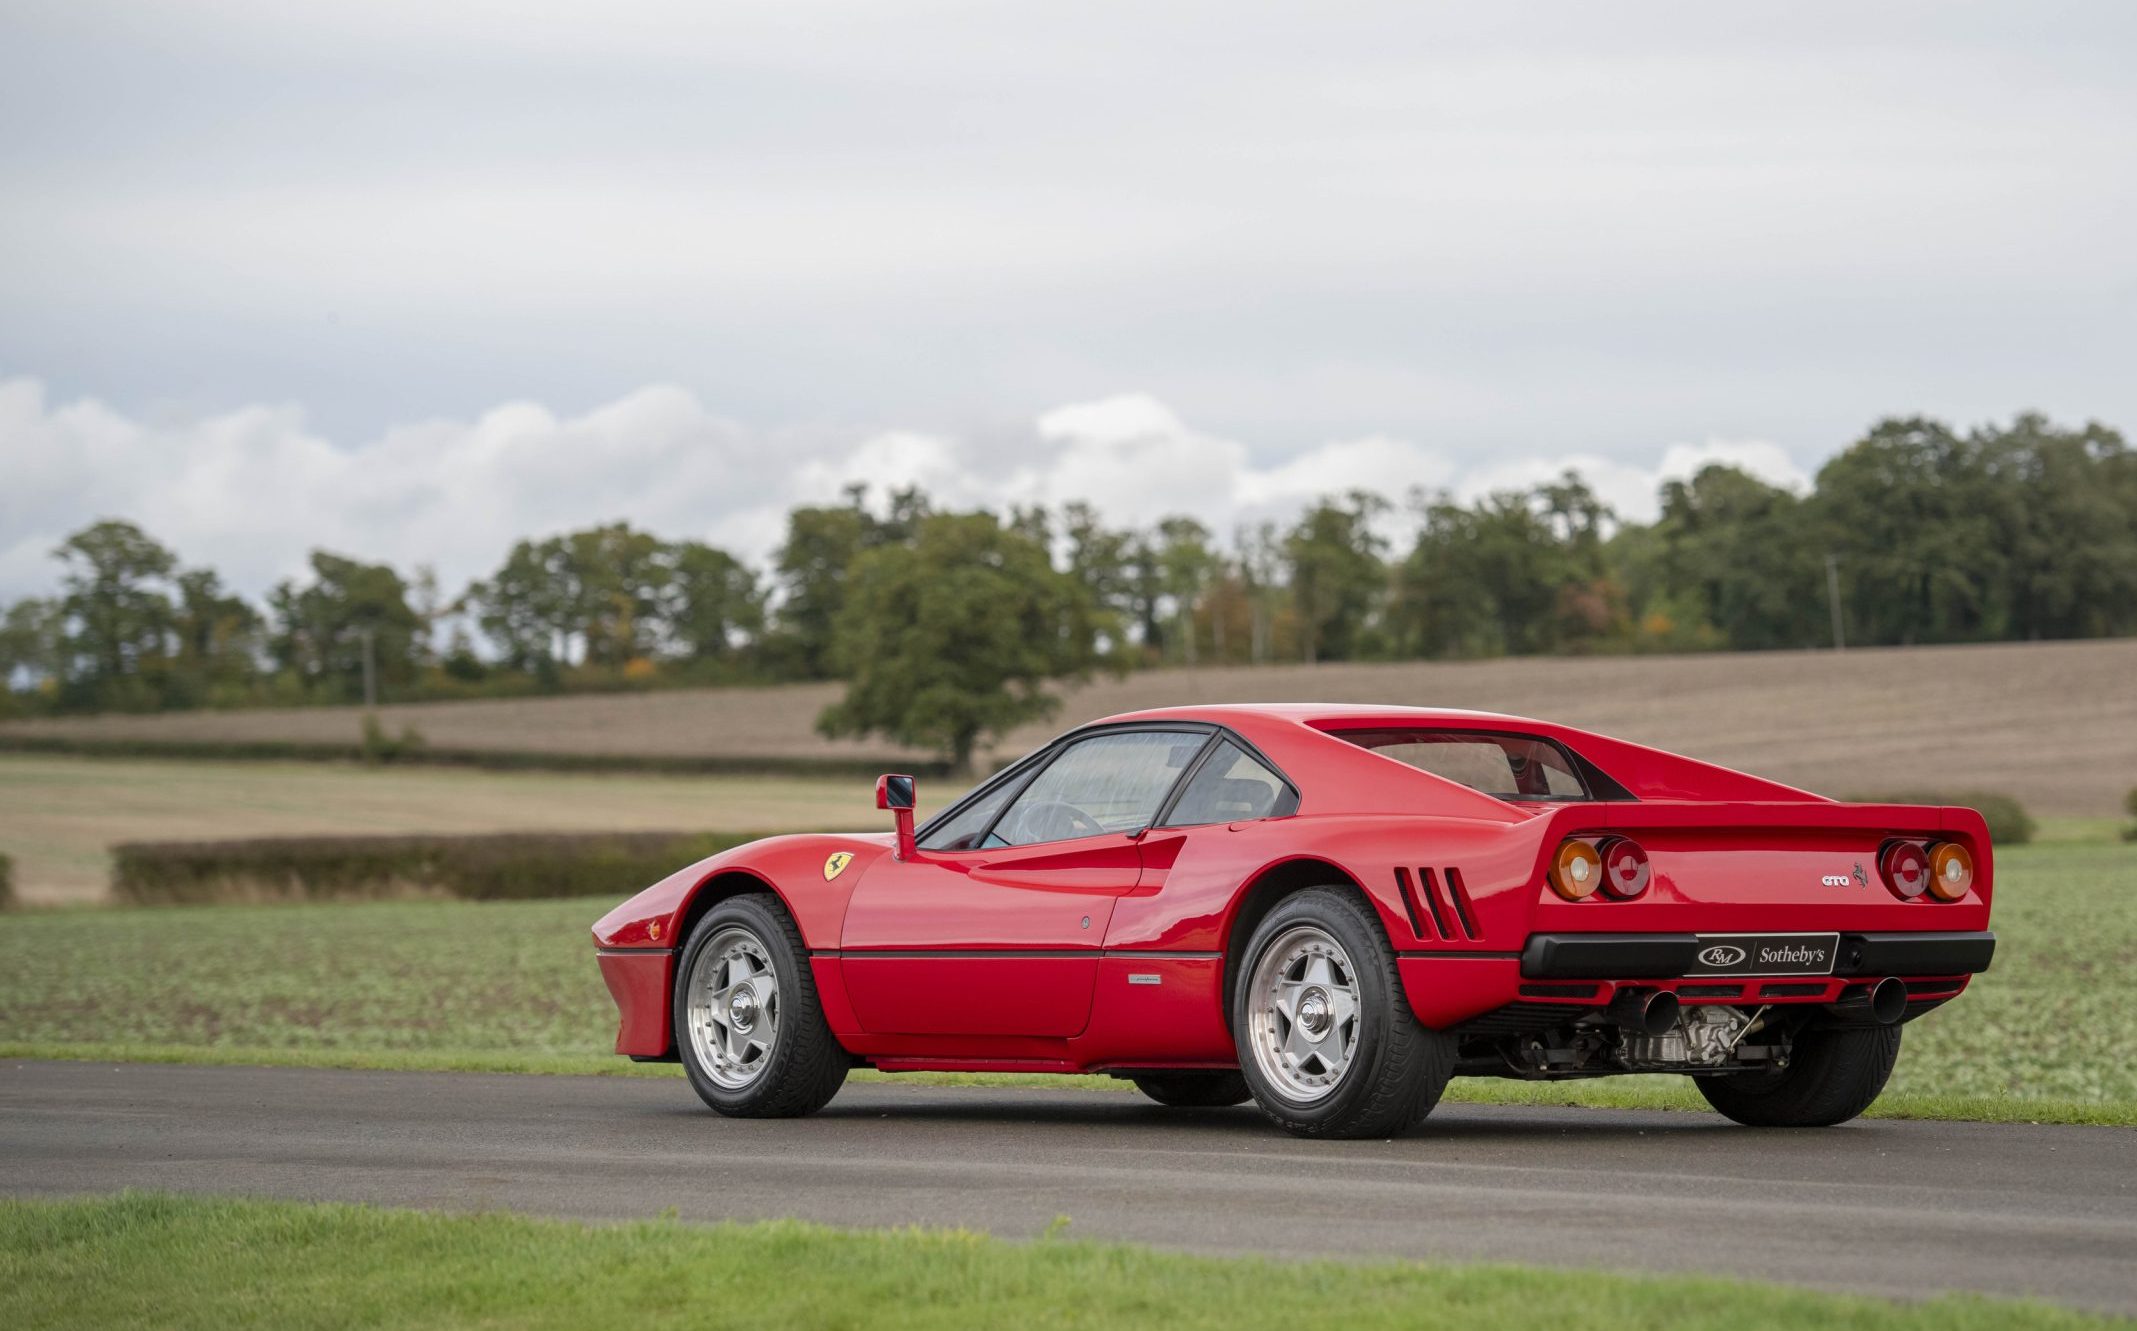 Report: RM Sotheby’s London auction results